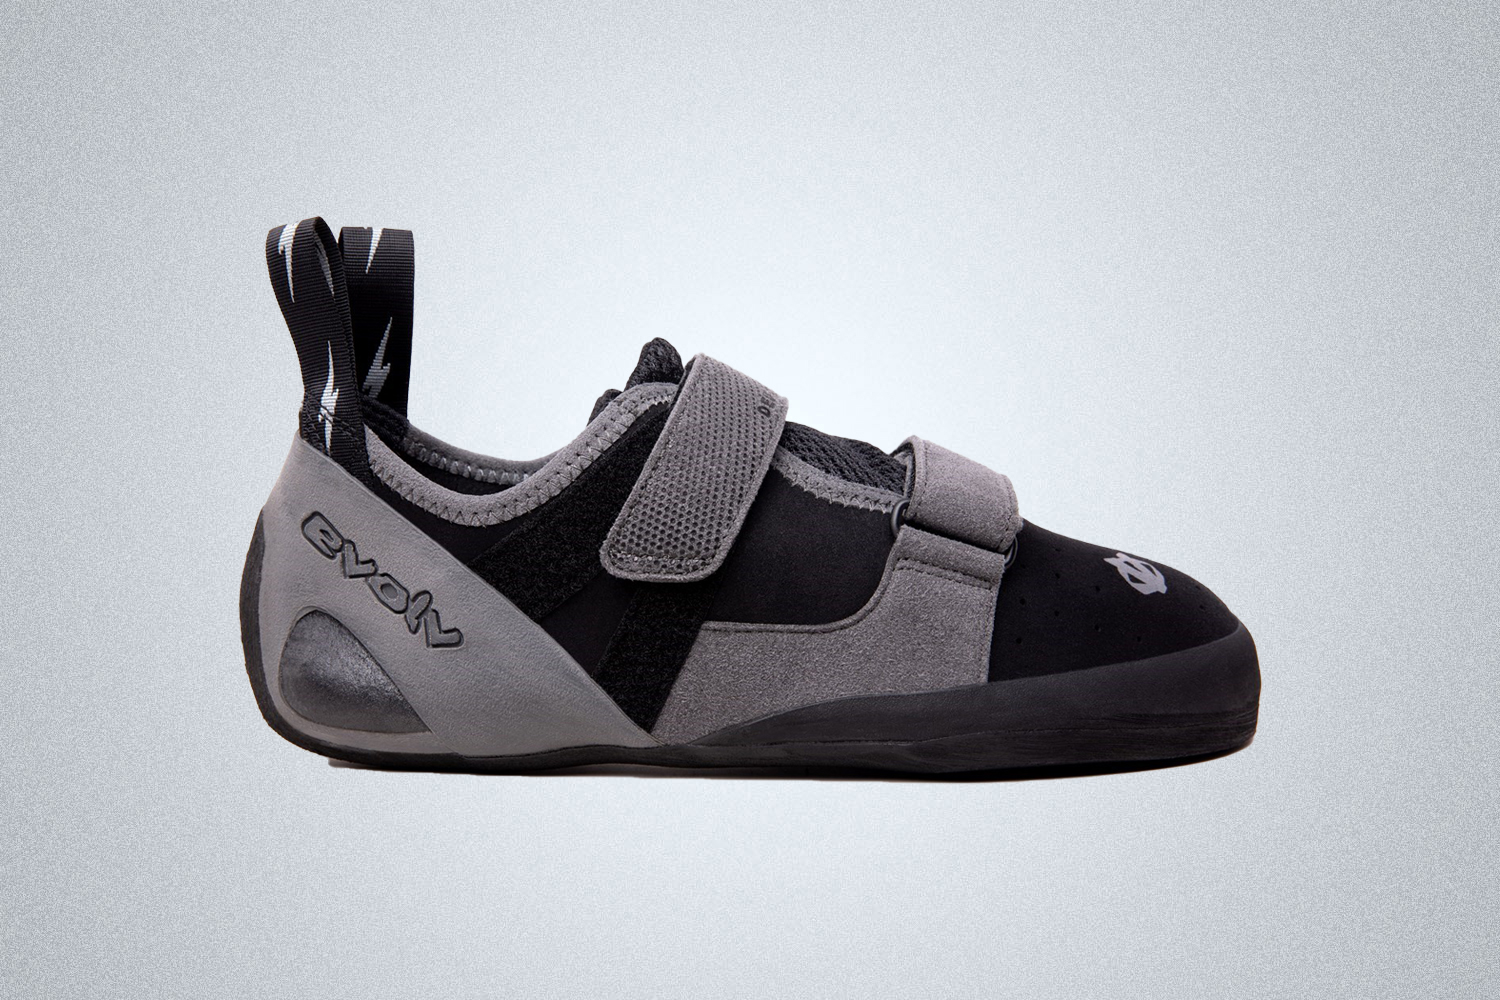 The Evolv Defy Climbing is one of the best climbing shoes for beginners in 2022